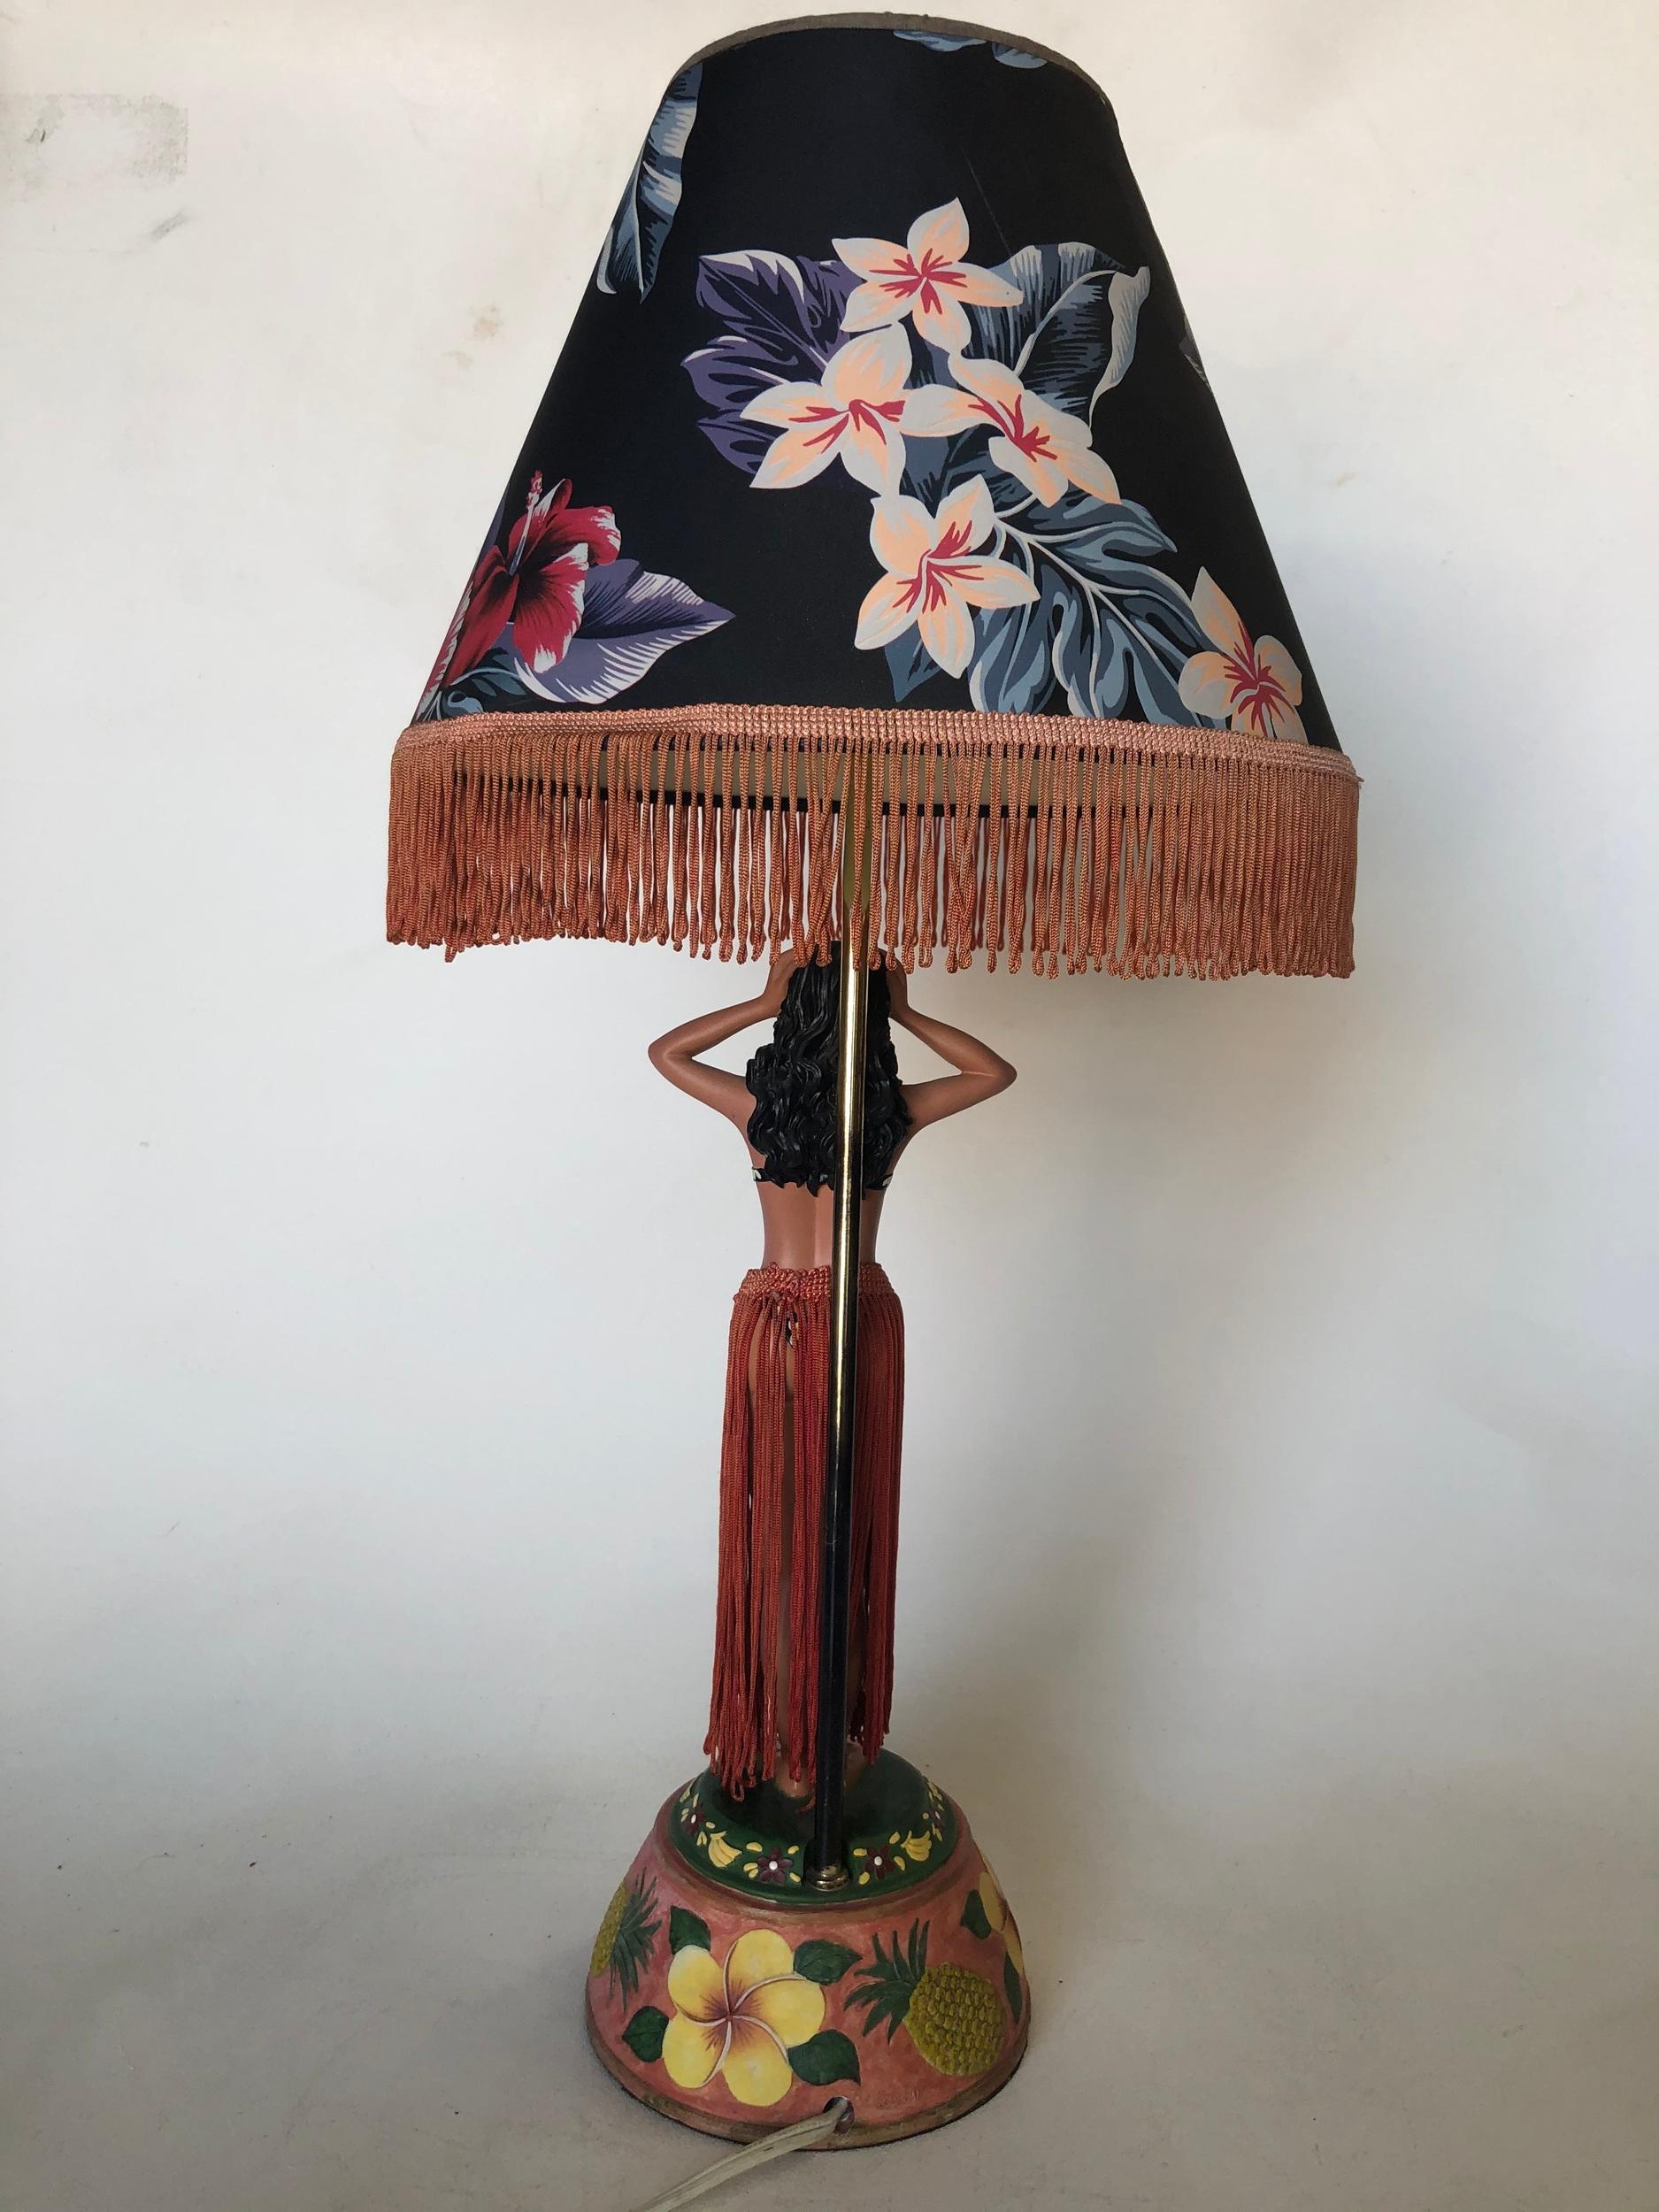 Pair of Hula Girl Resin Table Lamp with Floral Fringe Lamp Shades 1